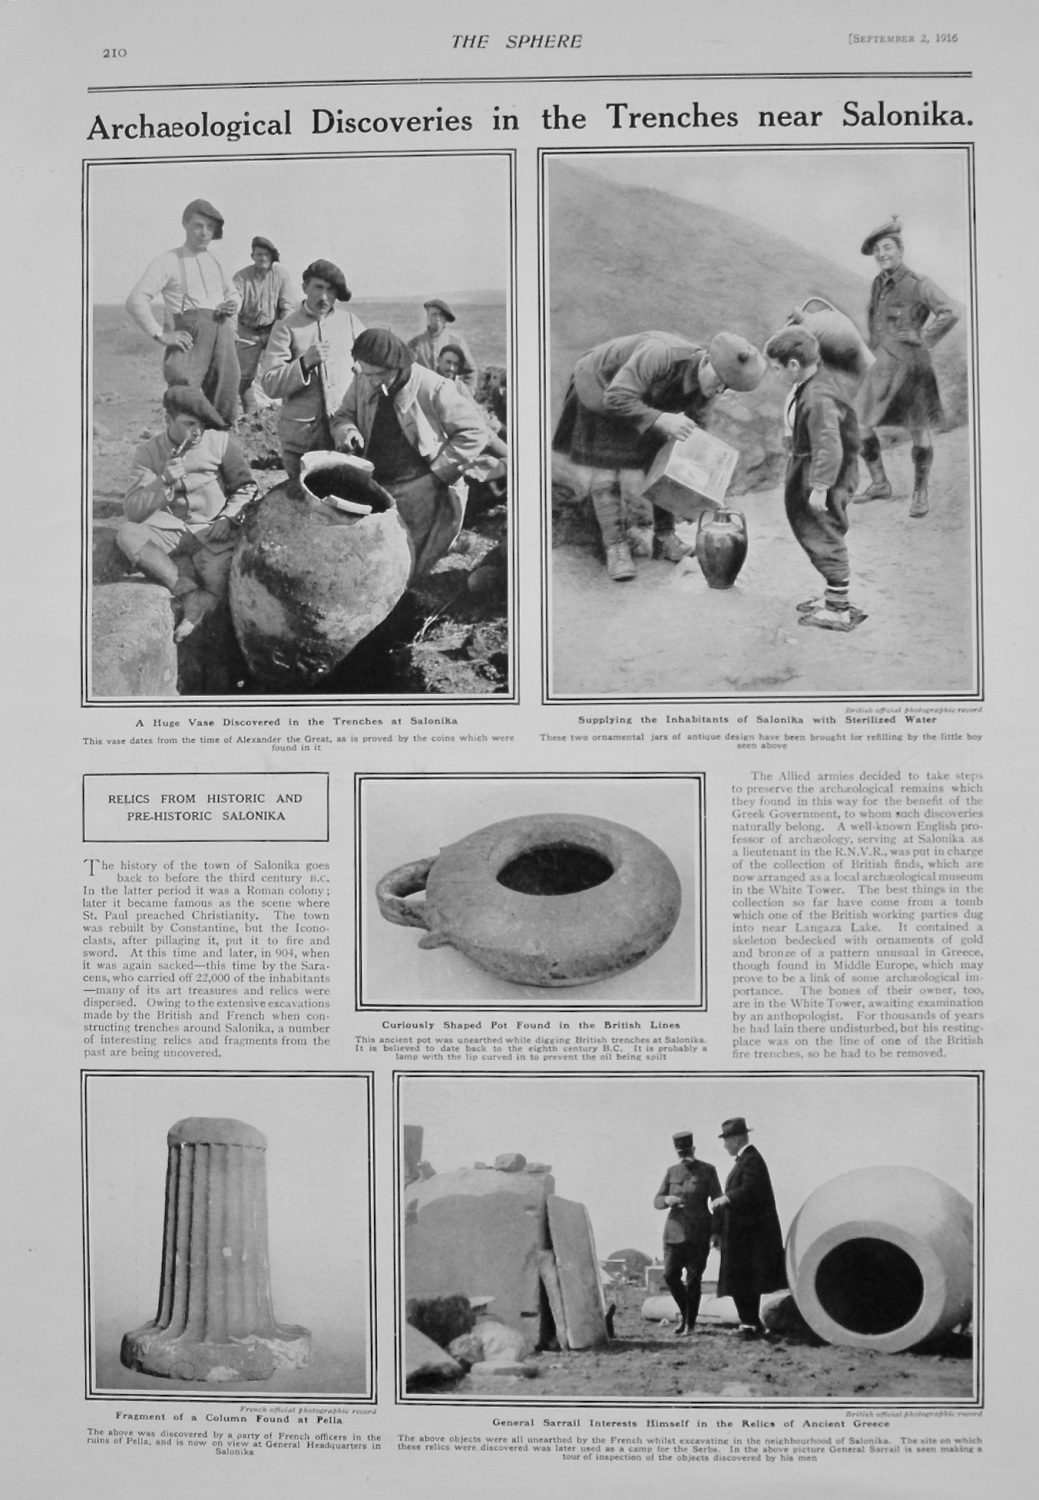 Achaeological Discoveries in the Trenches near Salonika. 1916